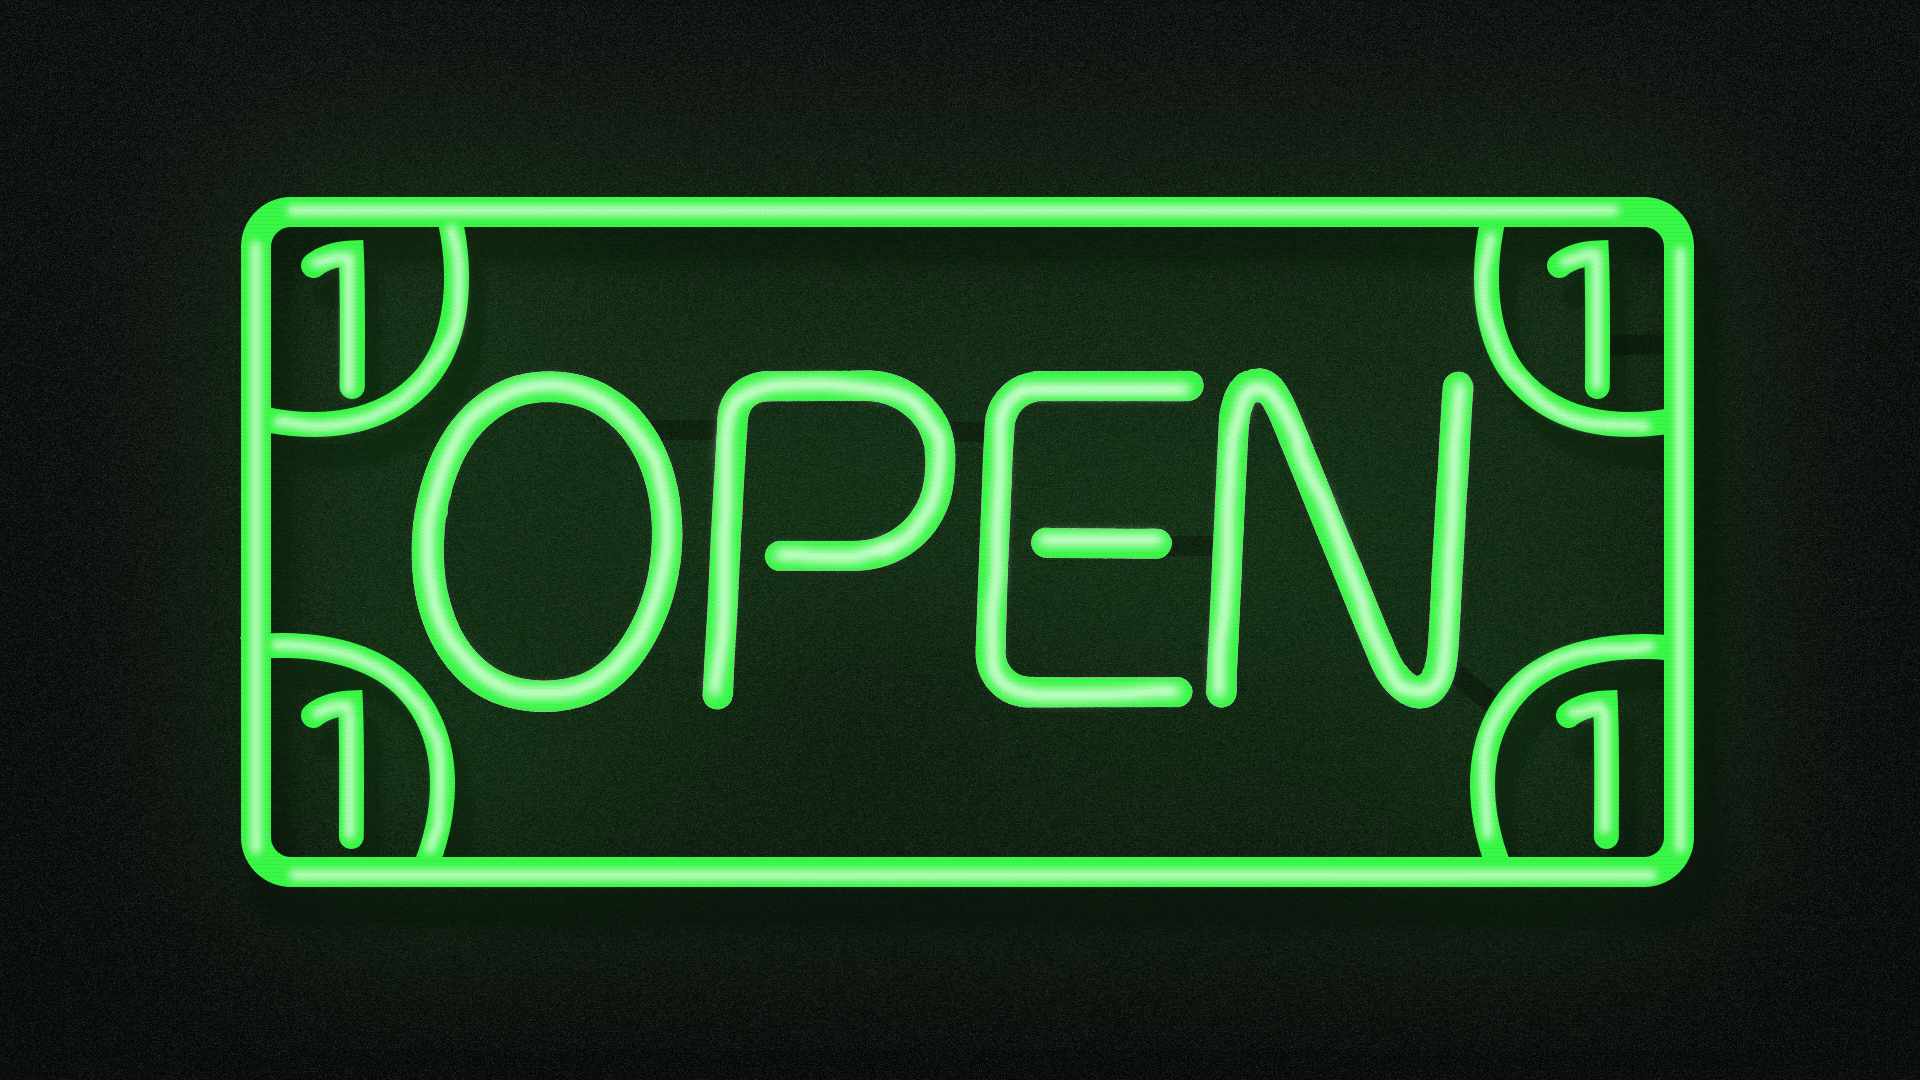 An illustration of an open sign with neon lights.